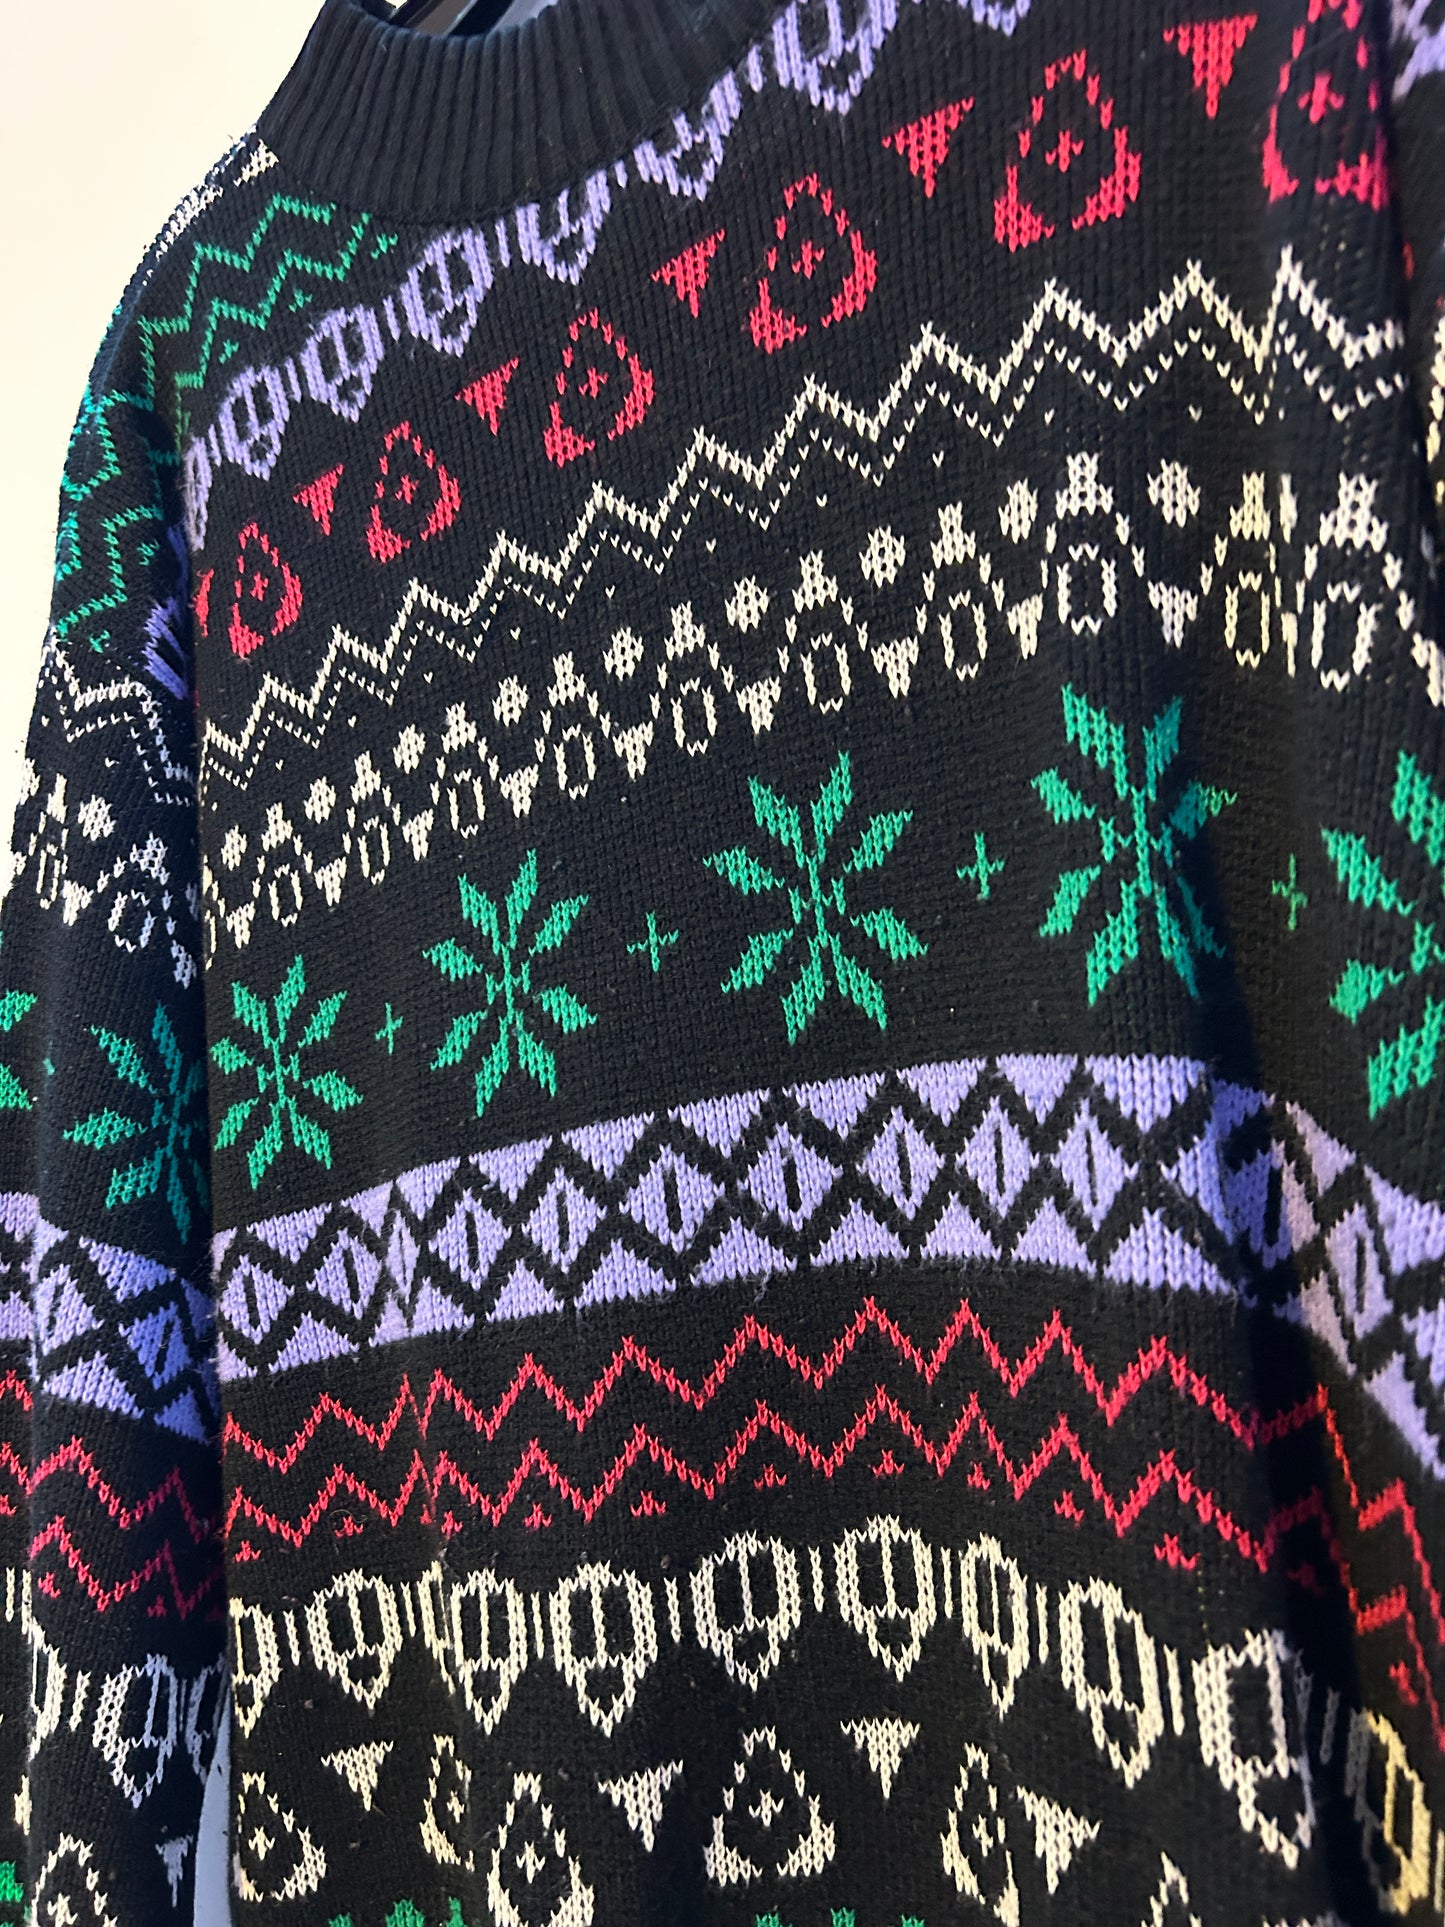 Vintage Felicia Holiday Patterned Sweater (M)